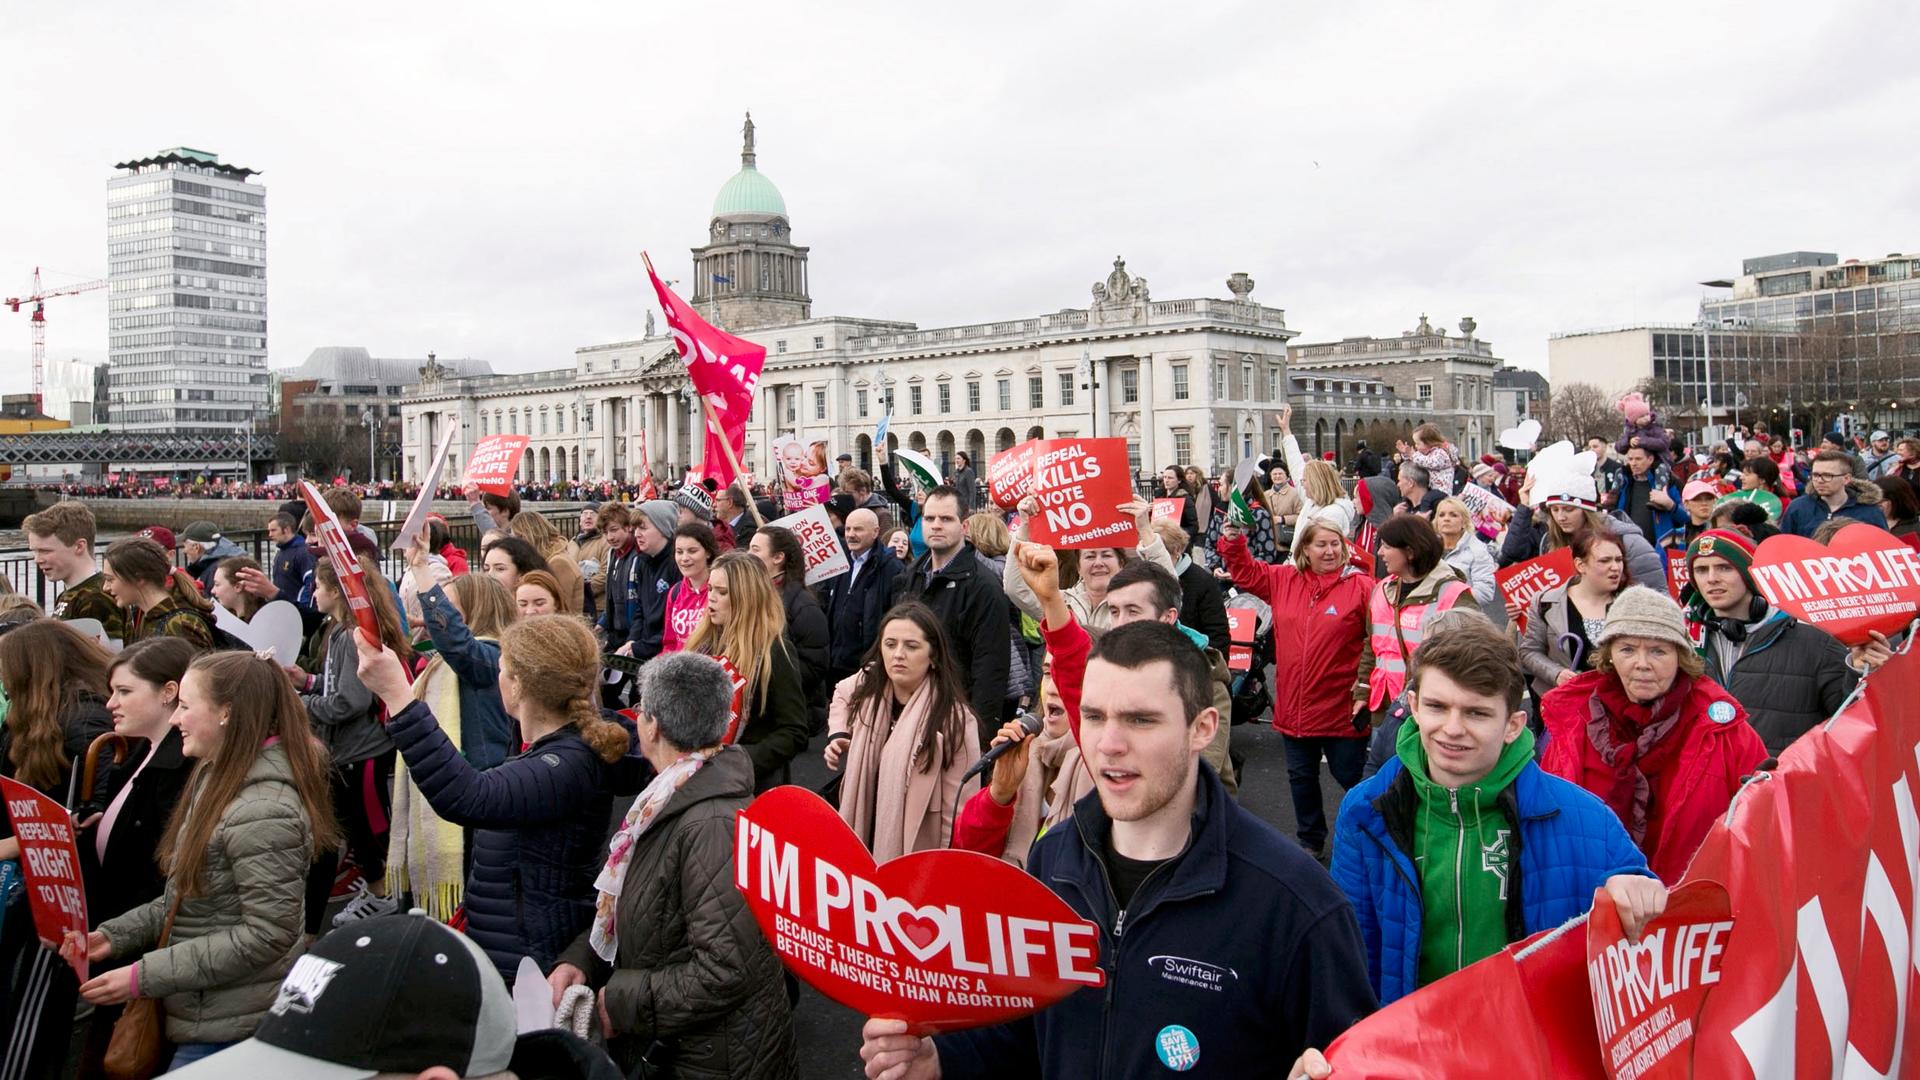 Participants in the "Rally for Life" demonstration marched through Dublin, Ireland on March 10, 2018. They called for voters to say 'No' in a national referendum set for May 25, asking if Ireland should repeal the constitutional amendment banning abortion